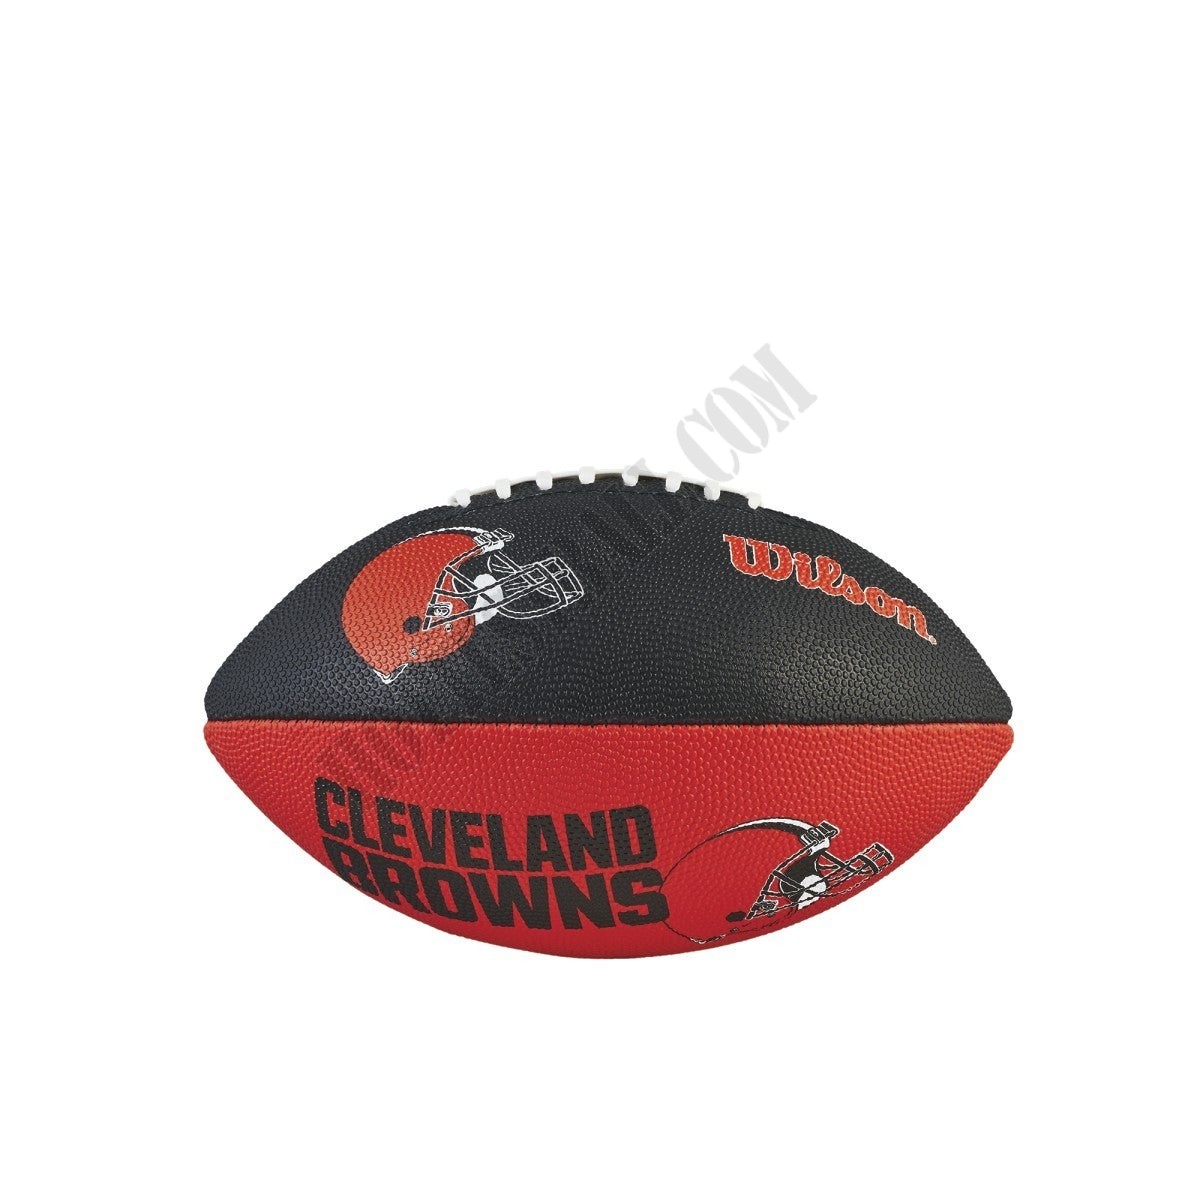 NFL Team Tailgate Football - Cleveland Browns ● Wilson Promotions - NFL Team Tailgate Football - Cleveland Browns ● Wilson Promotions